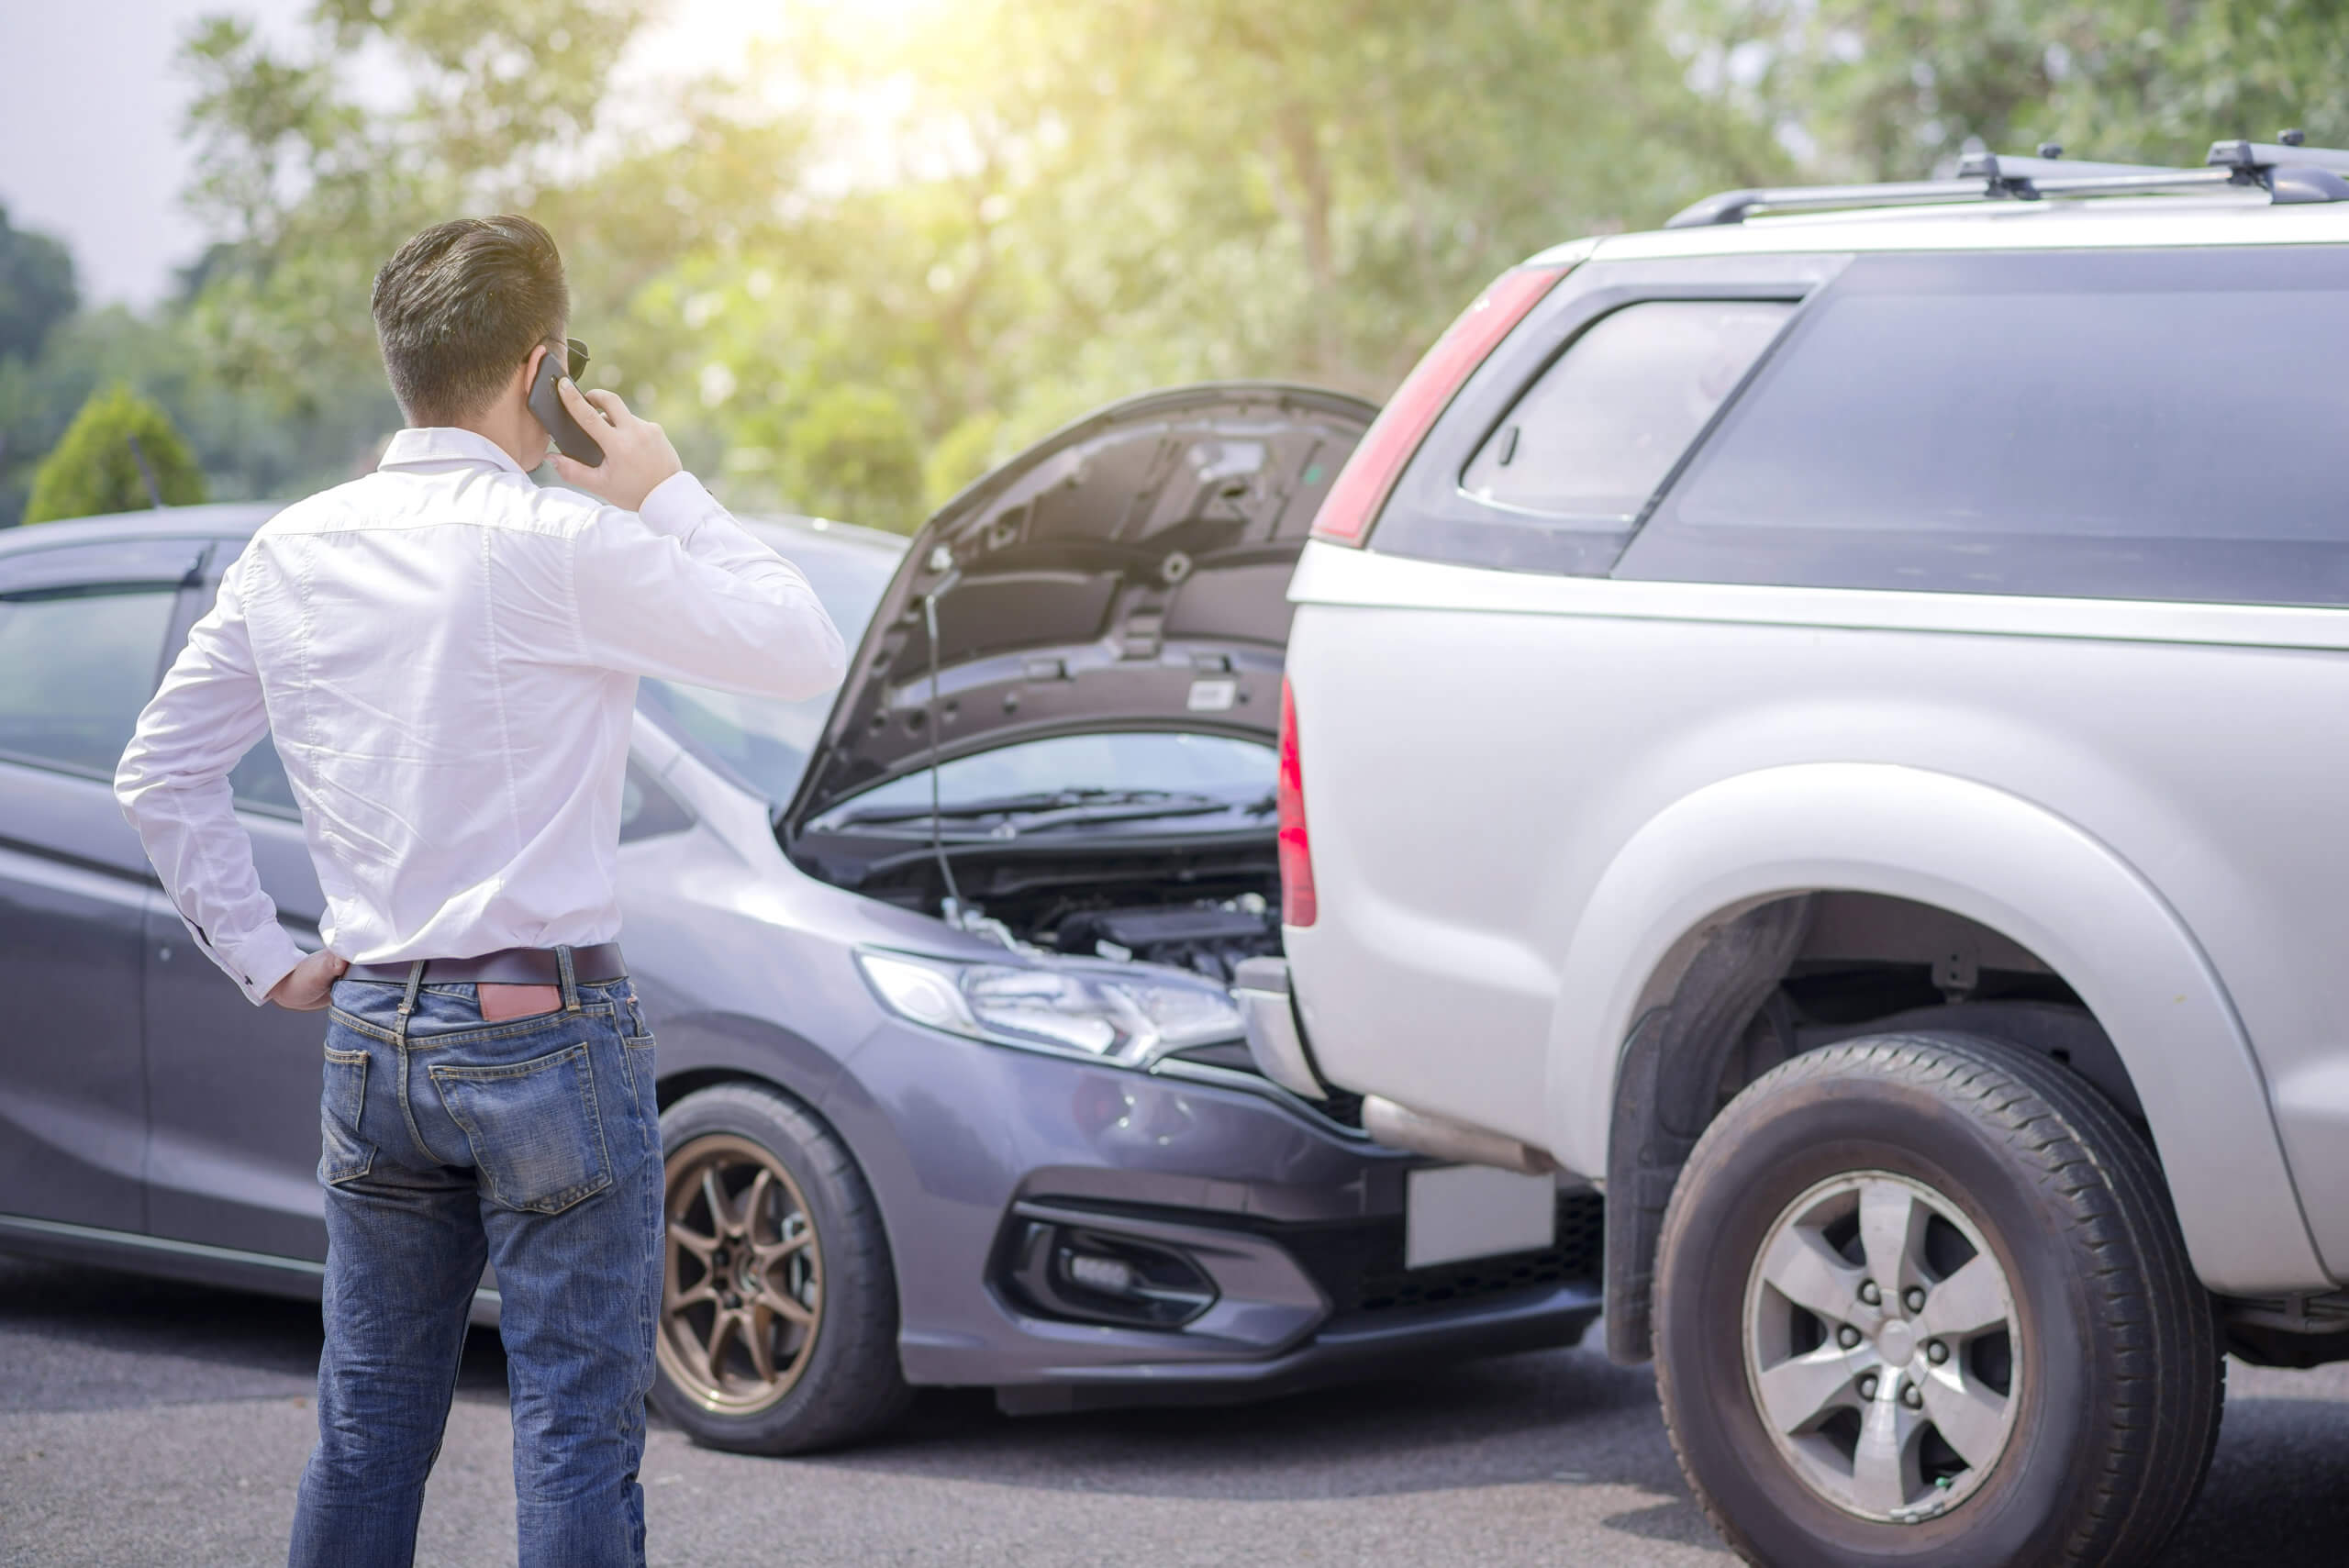 All You Need to Know About Determining The Fault In Rear-End Collision